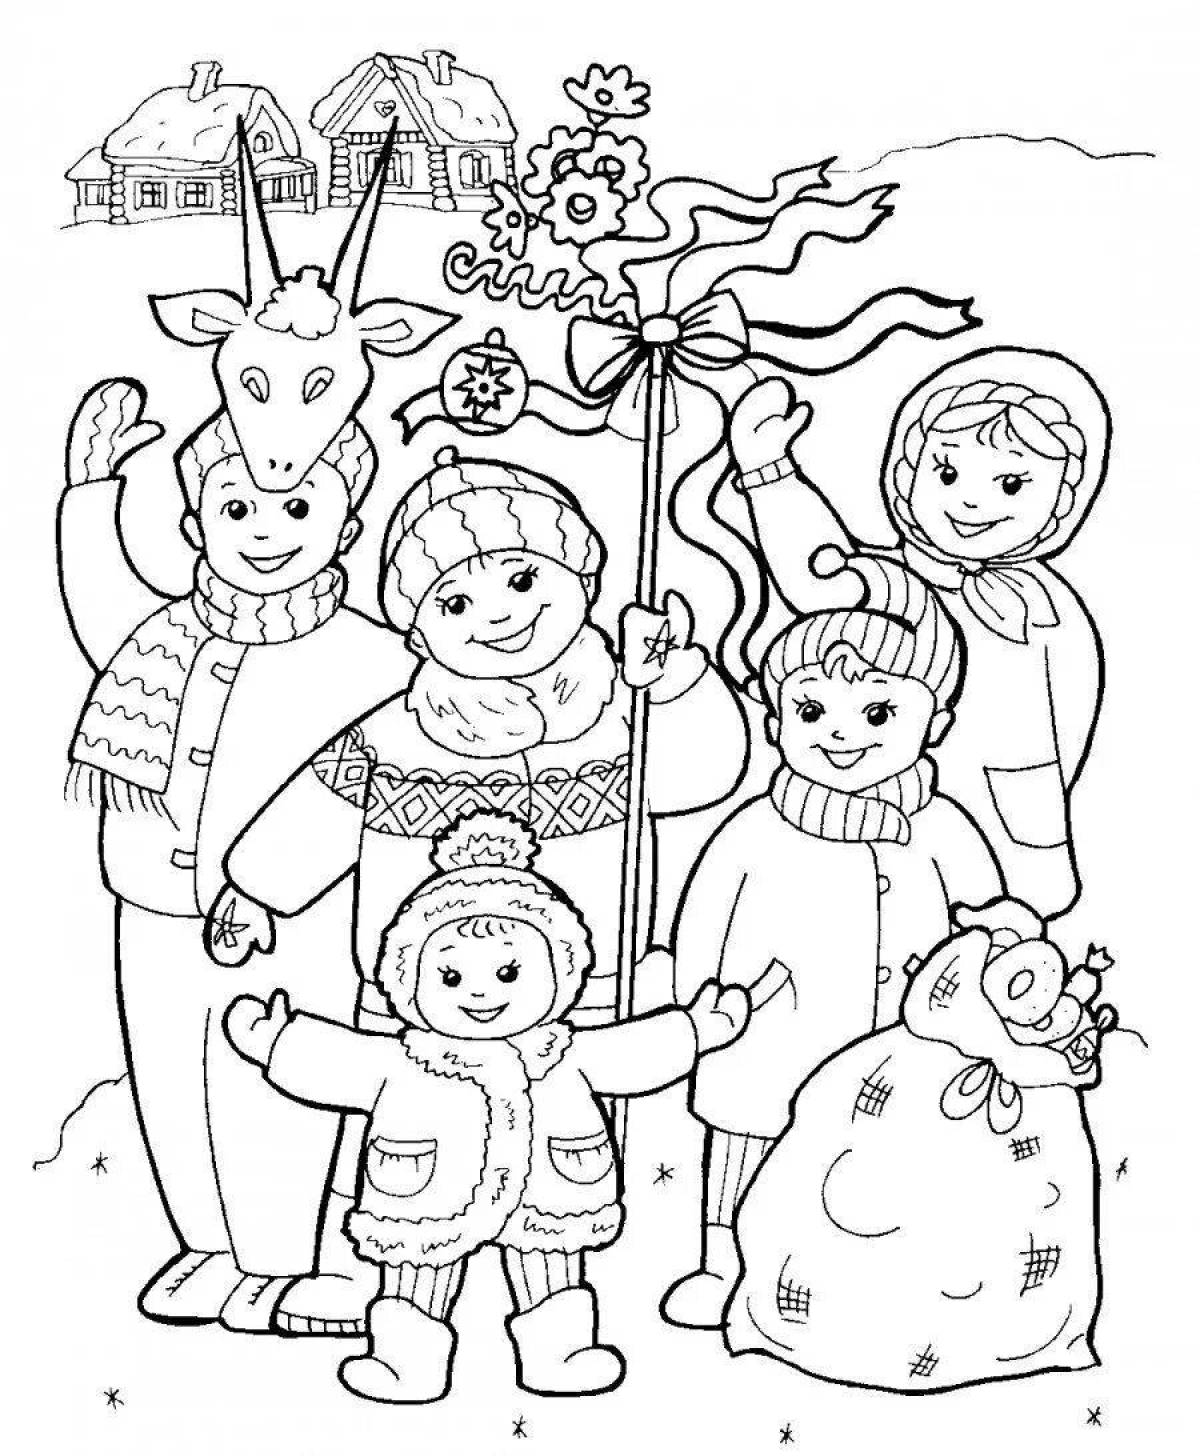 Luminous Christmas coloring book for children 5-6 years old